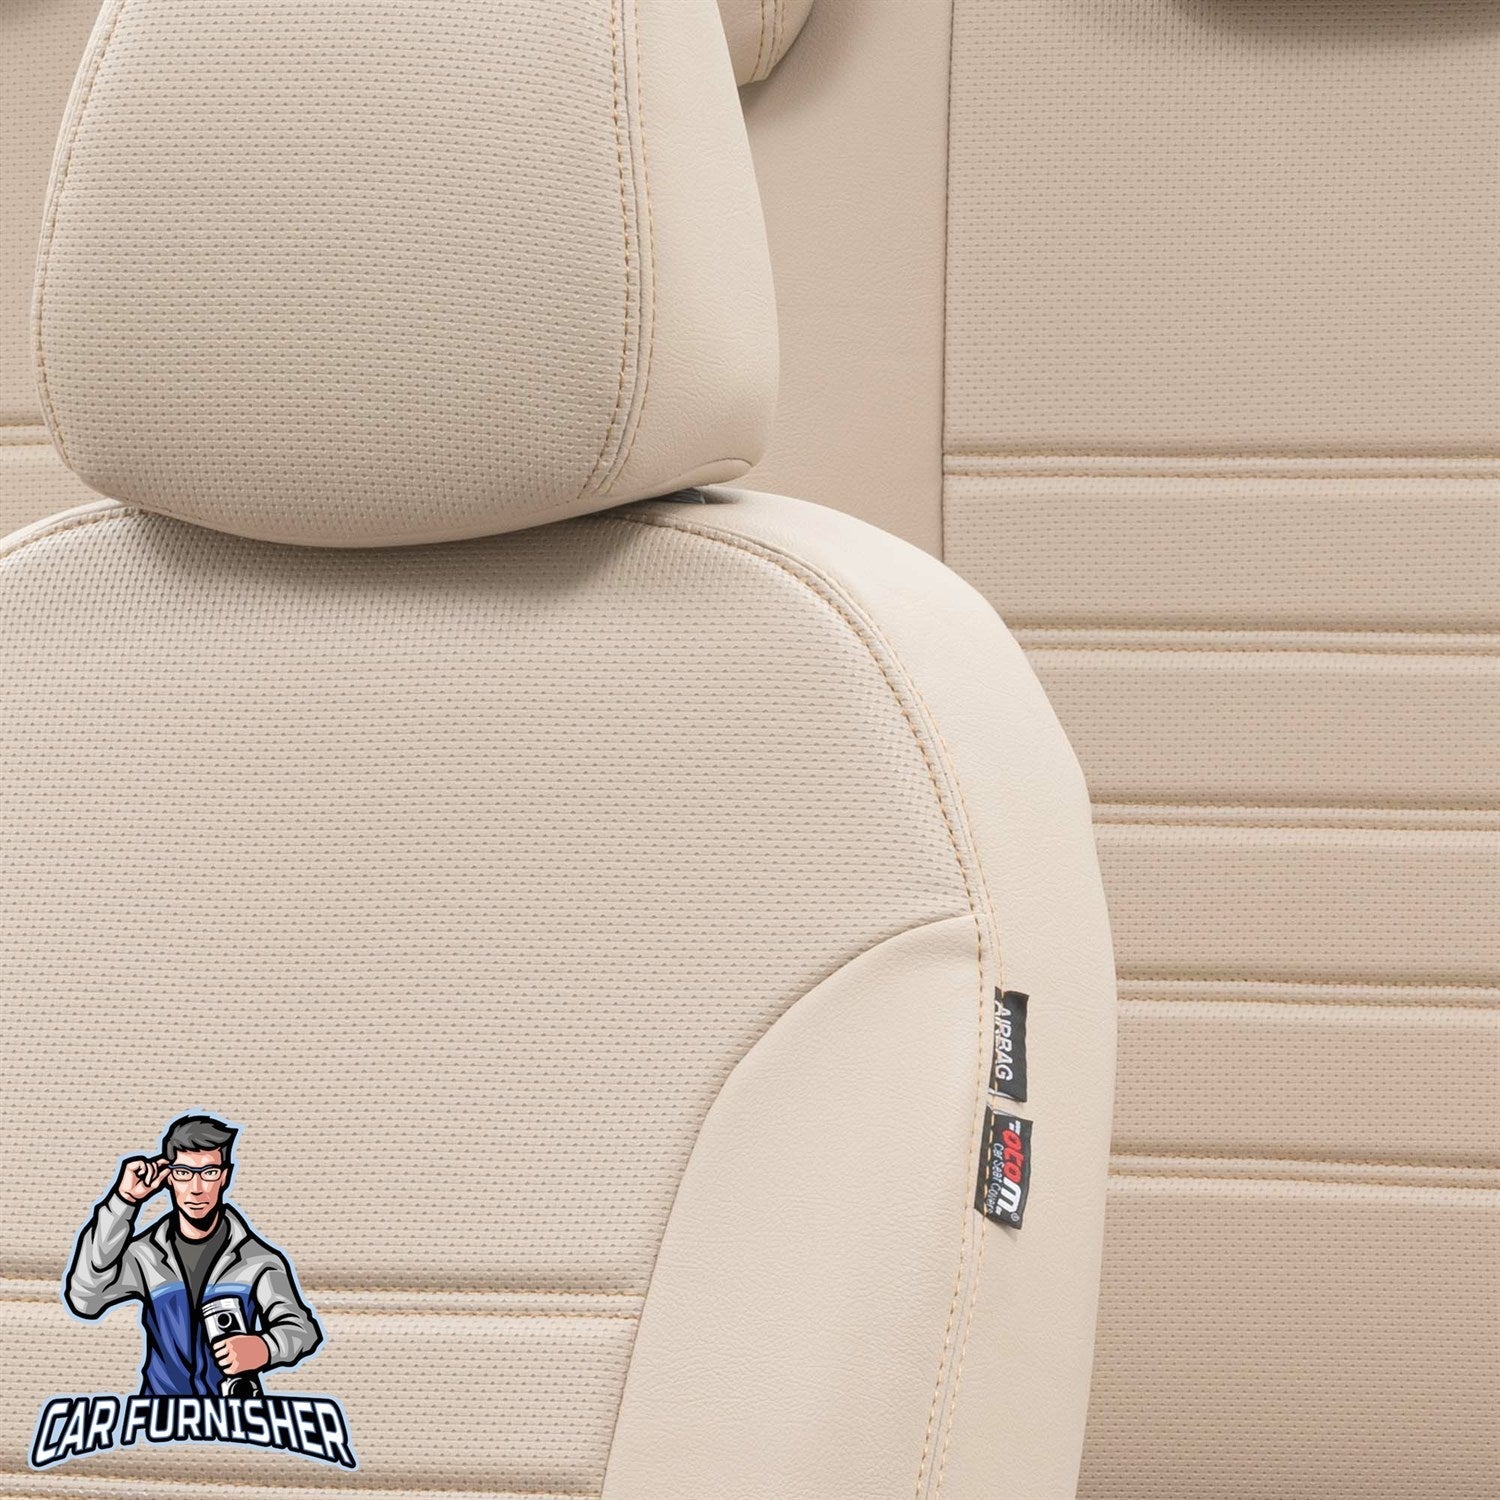 Fiat Fullback Seat Covers New York Leather Design Beige Leather